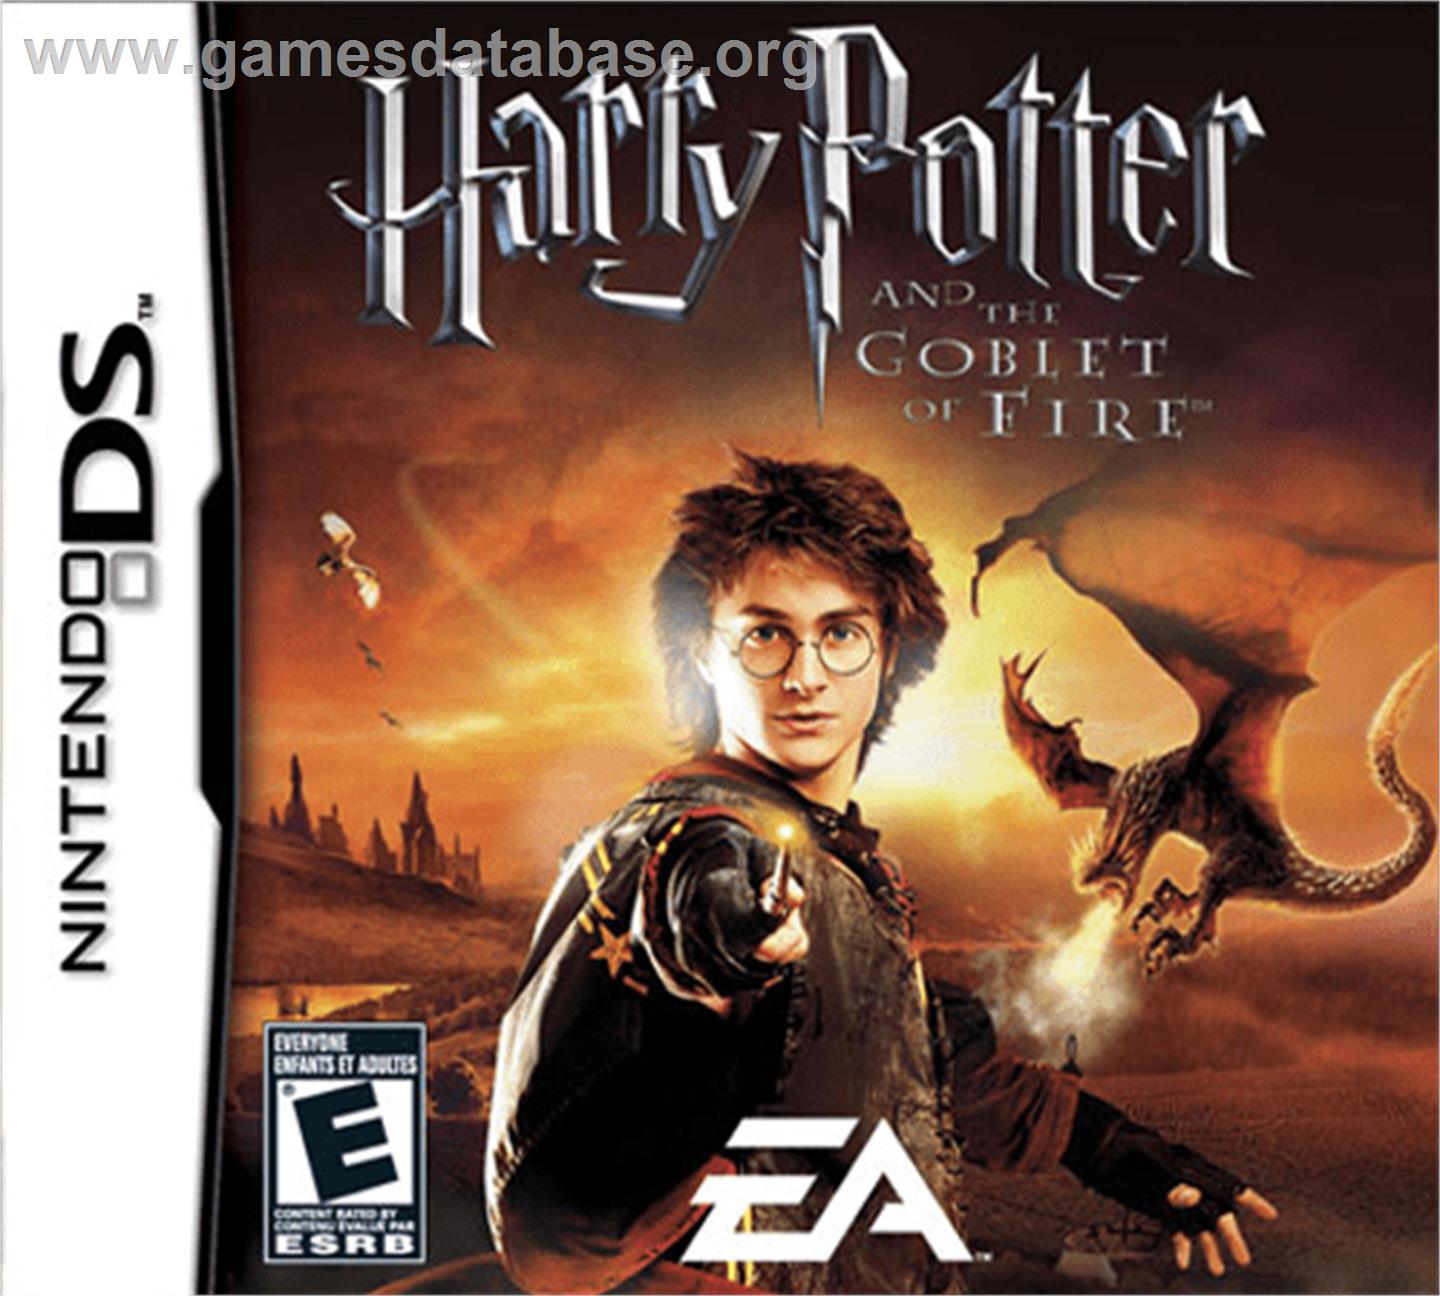 Harry Potter and the Goblet of Fire - Nintendo DS - Artwork - Box